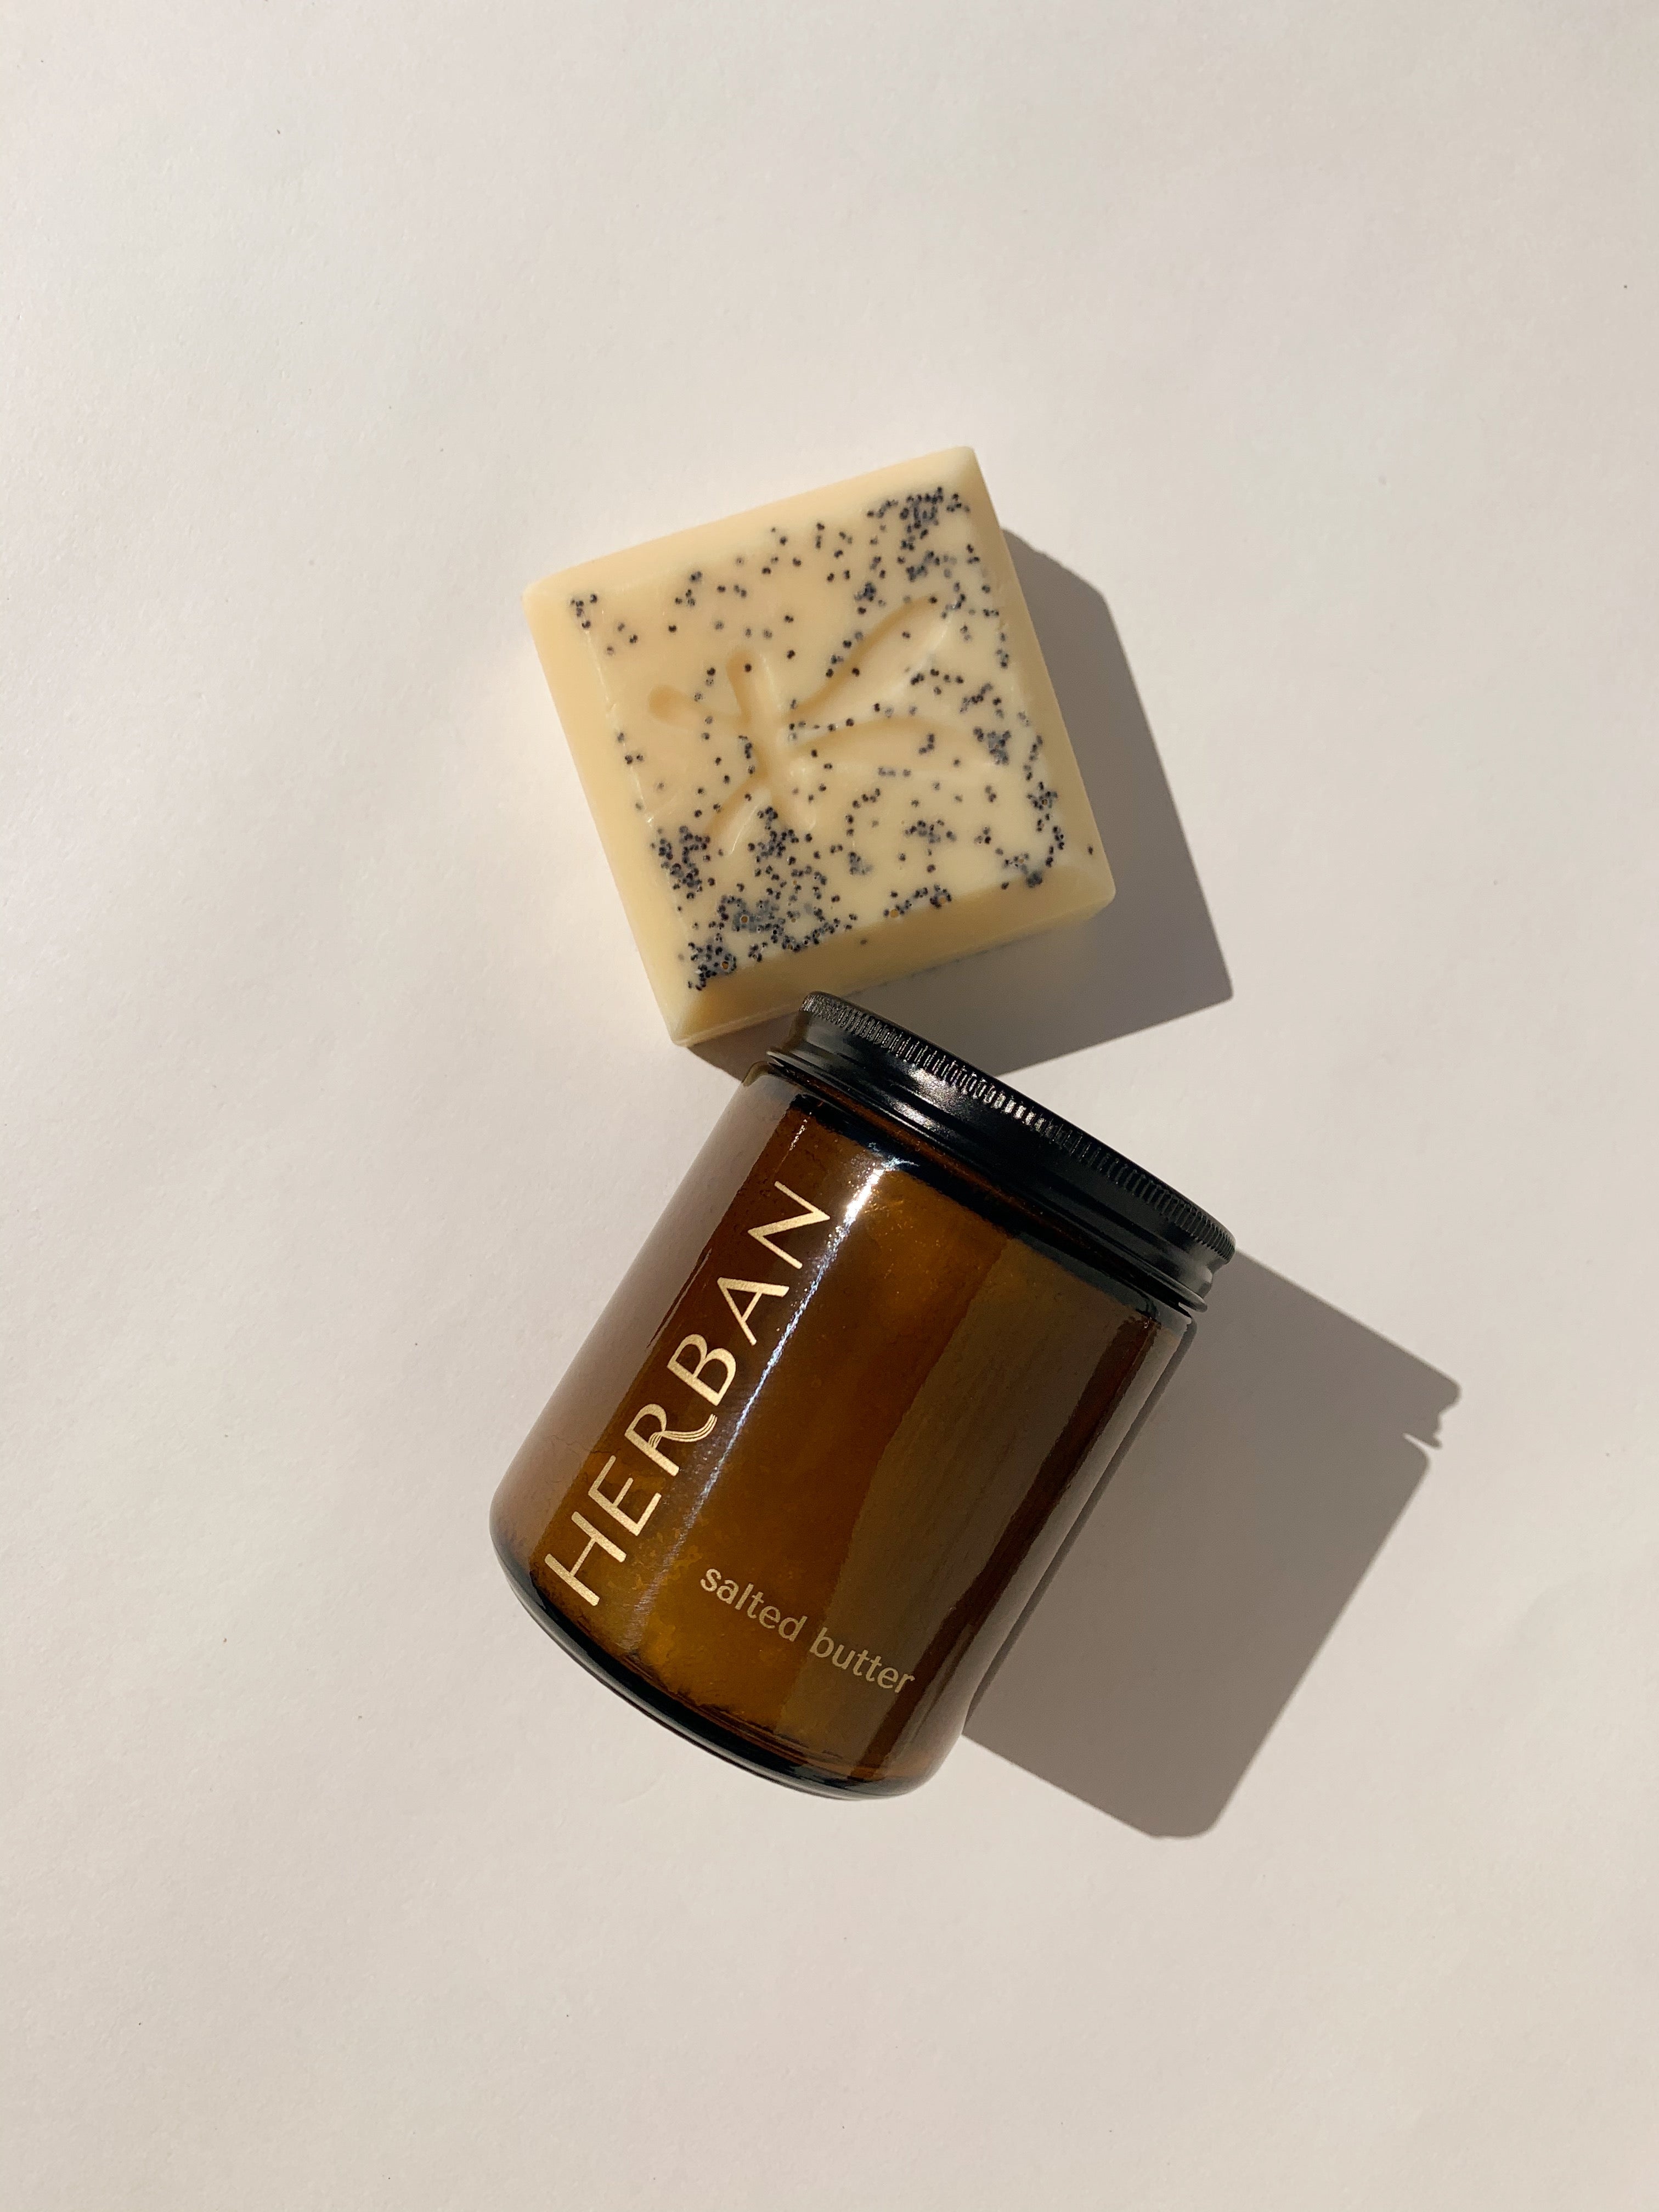 Herban Body Care Best Sellers include our signature humectant and herbal soap bar and our amber glass packaged, hydrating shea butter and sea salt body scrub!